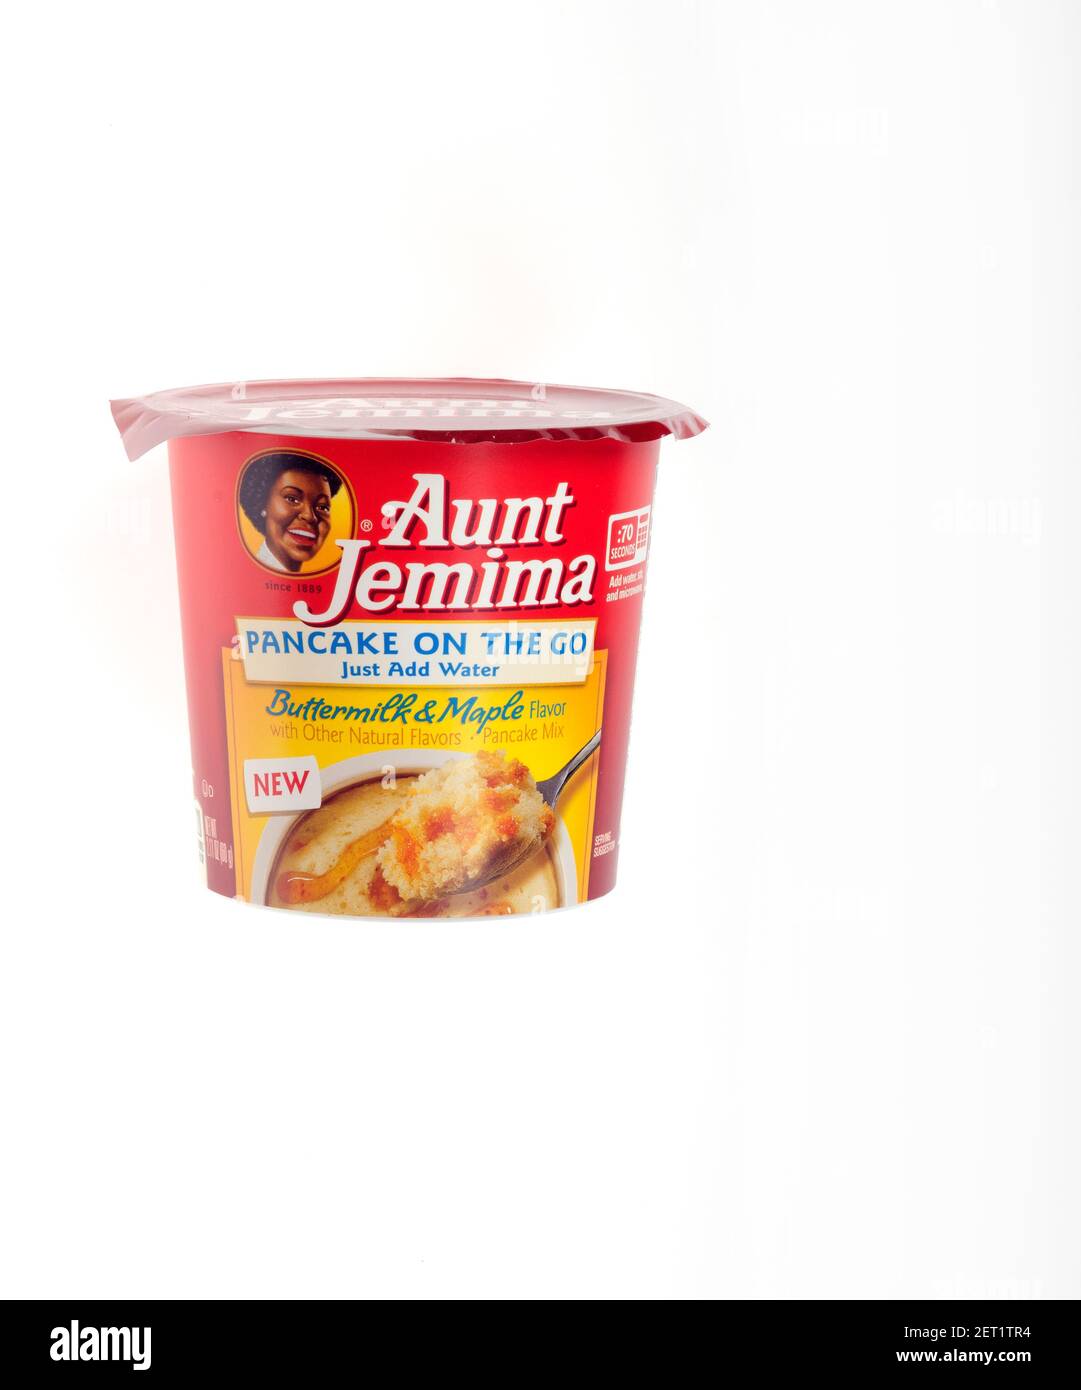 Aunt Jemima Buttermilk & Maple Pancake On The Go Cup Stock Photo